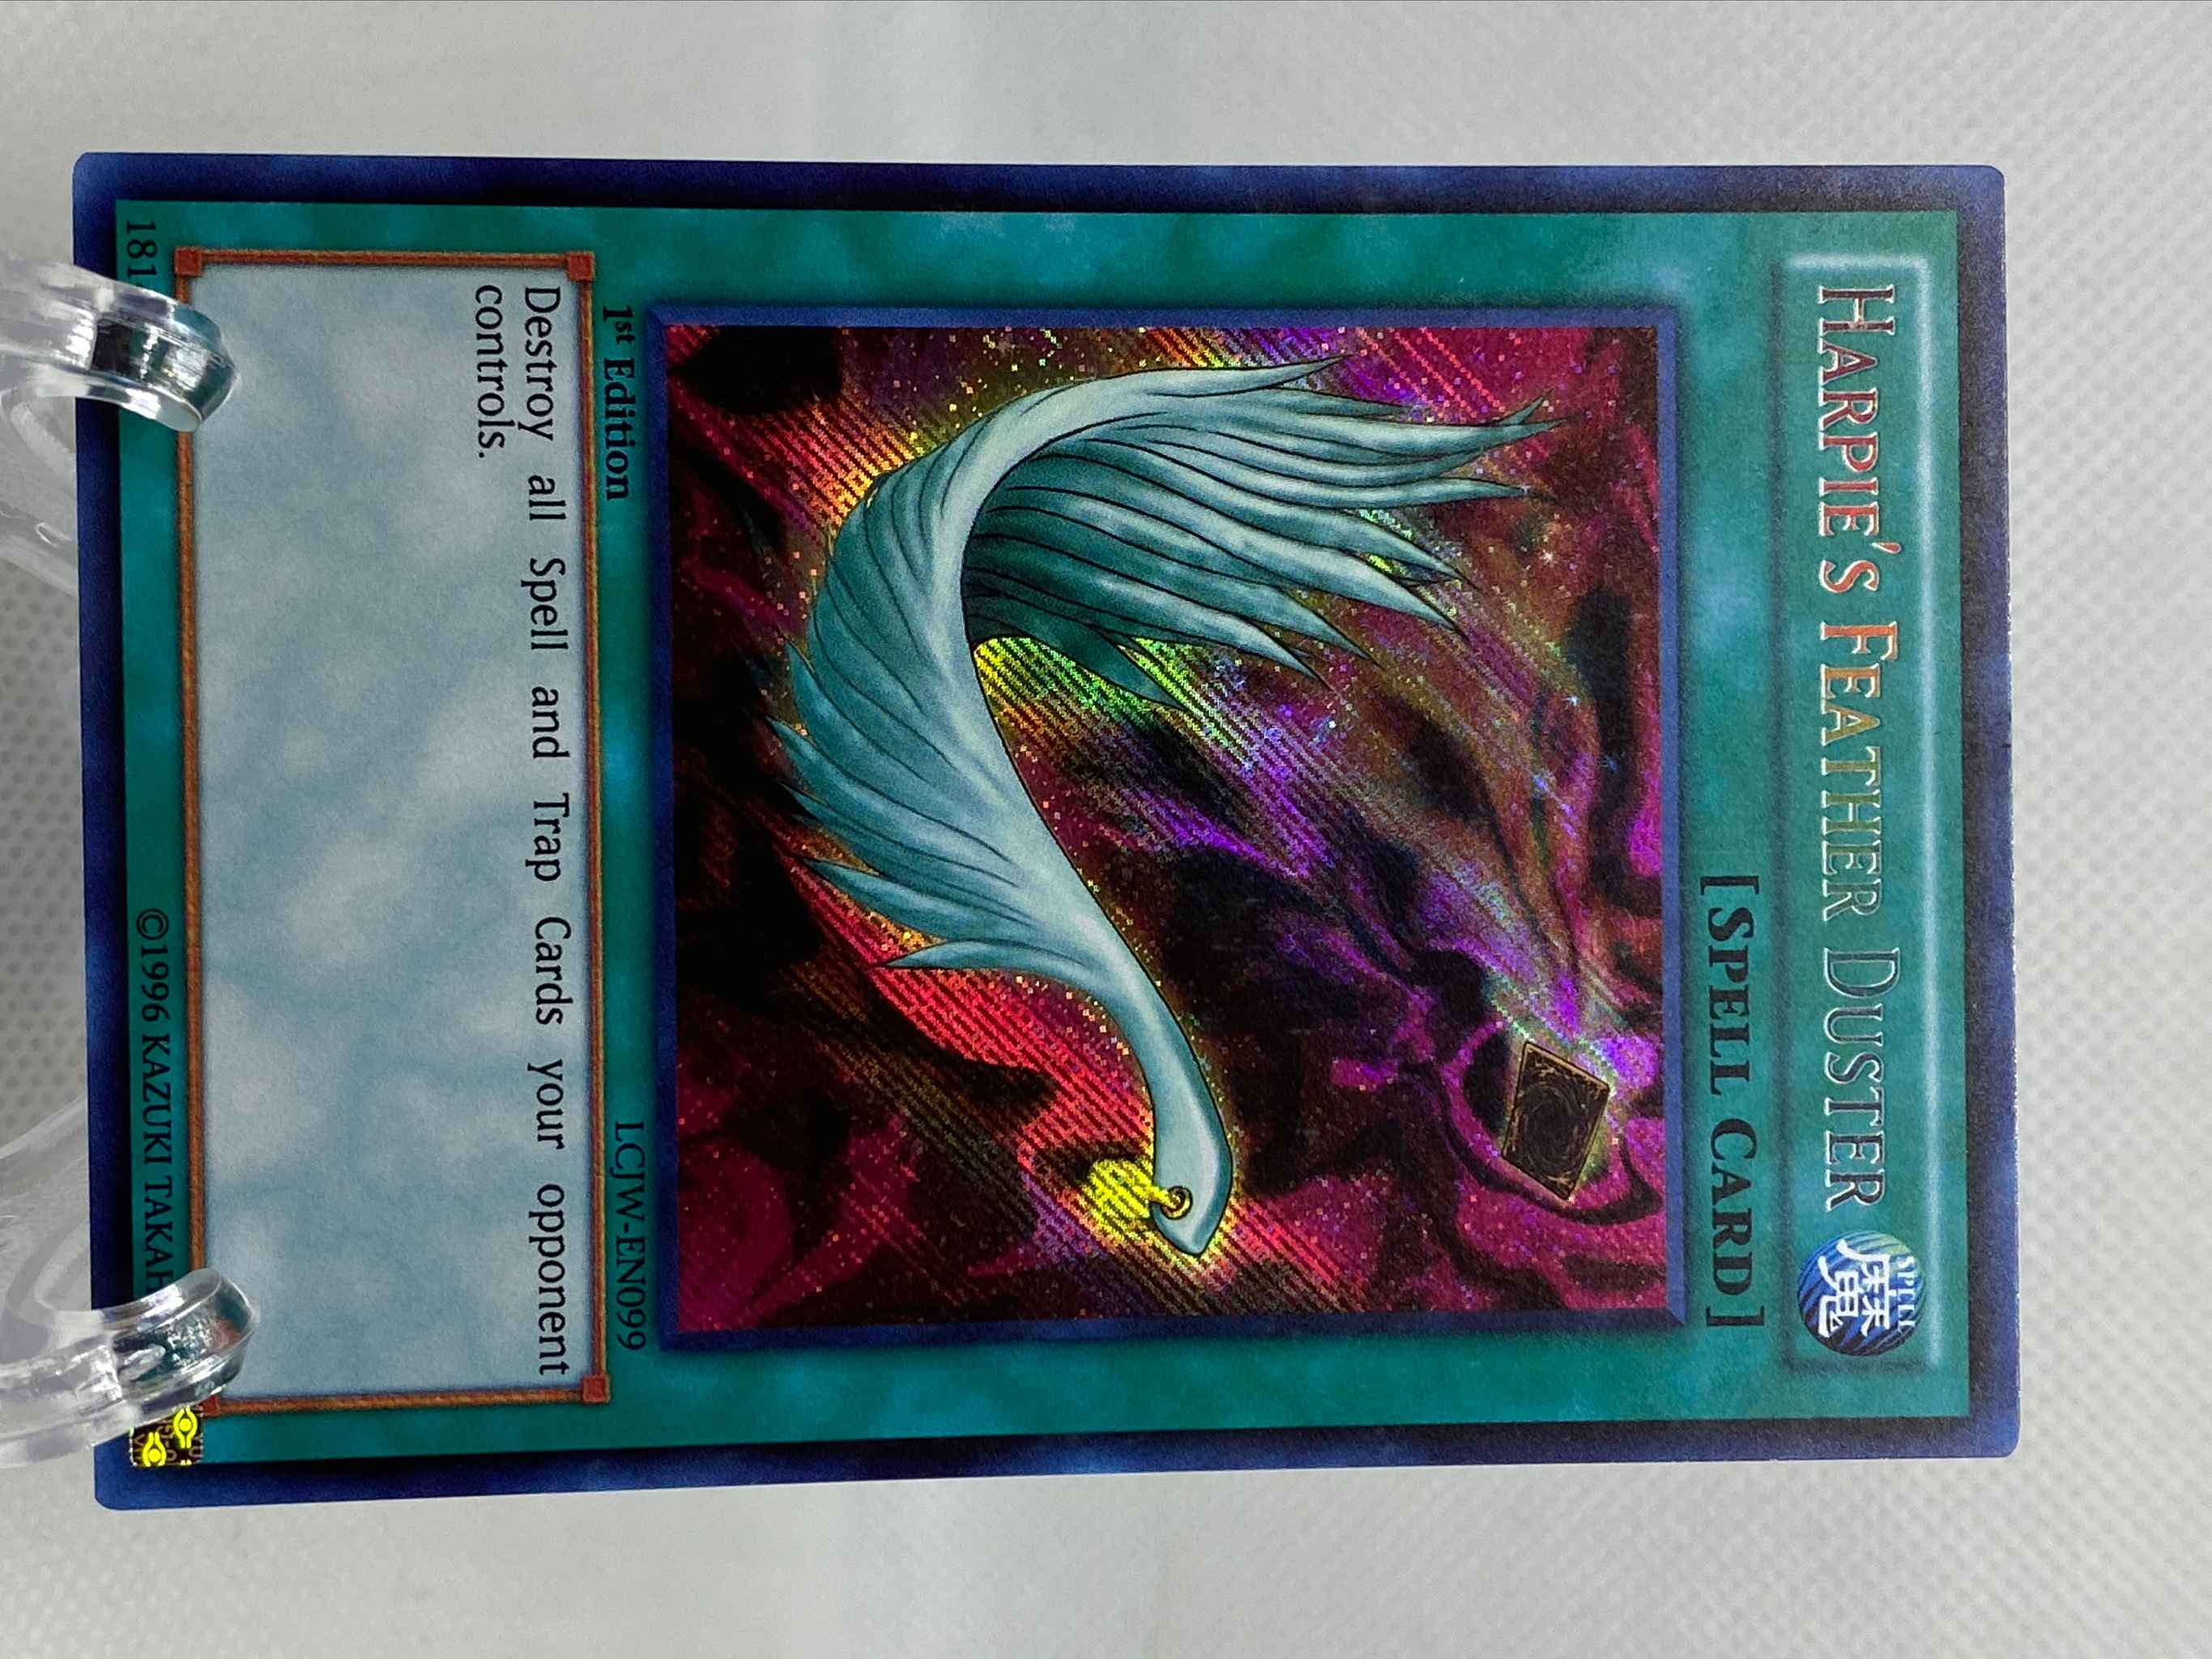 1st Edition Secret Rare Harpie39;s Feather Duster LCJW-EN099 - Legendary Collection 4: Joeys World Yu-Gi-Oh!!